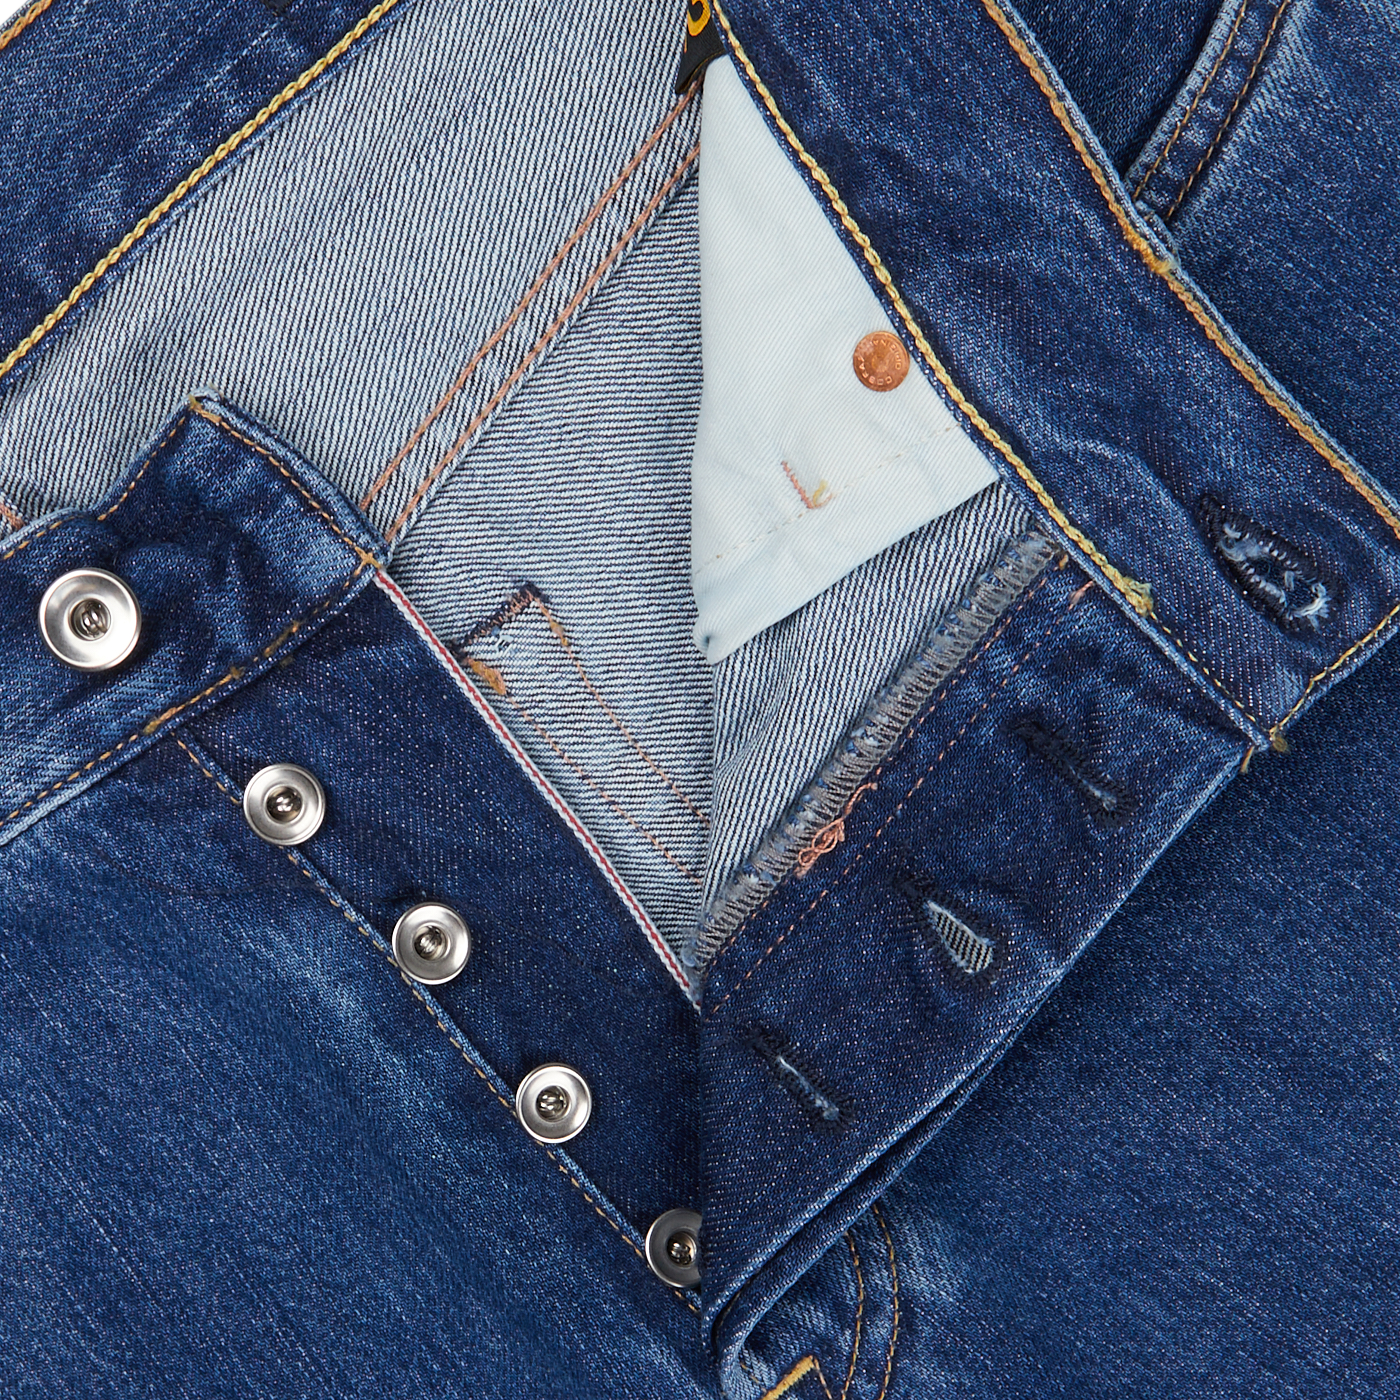 Close-up of a blue denim jacket made from C.O.F Studio's Blue Organic Kurioki Cotton M7 6x Wash Jeans with silver snap buttons and visible stitching details.